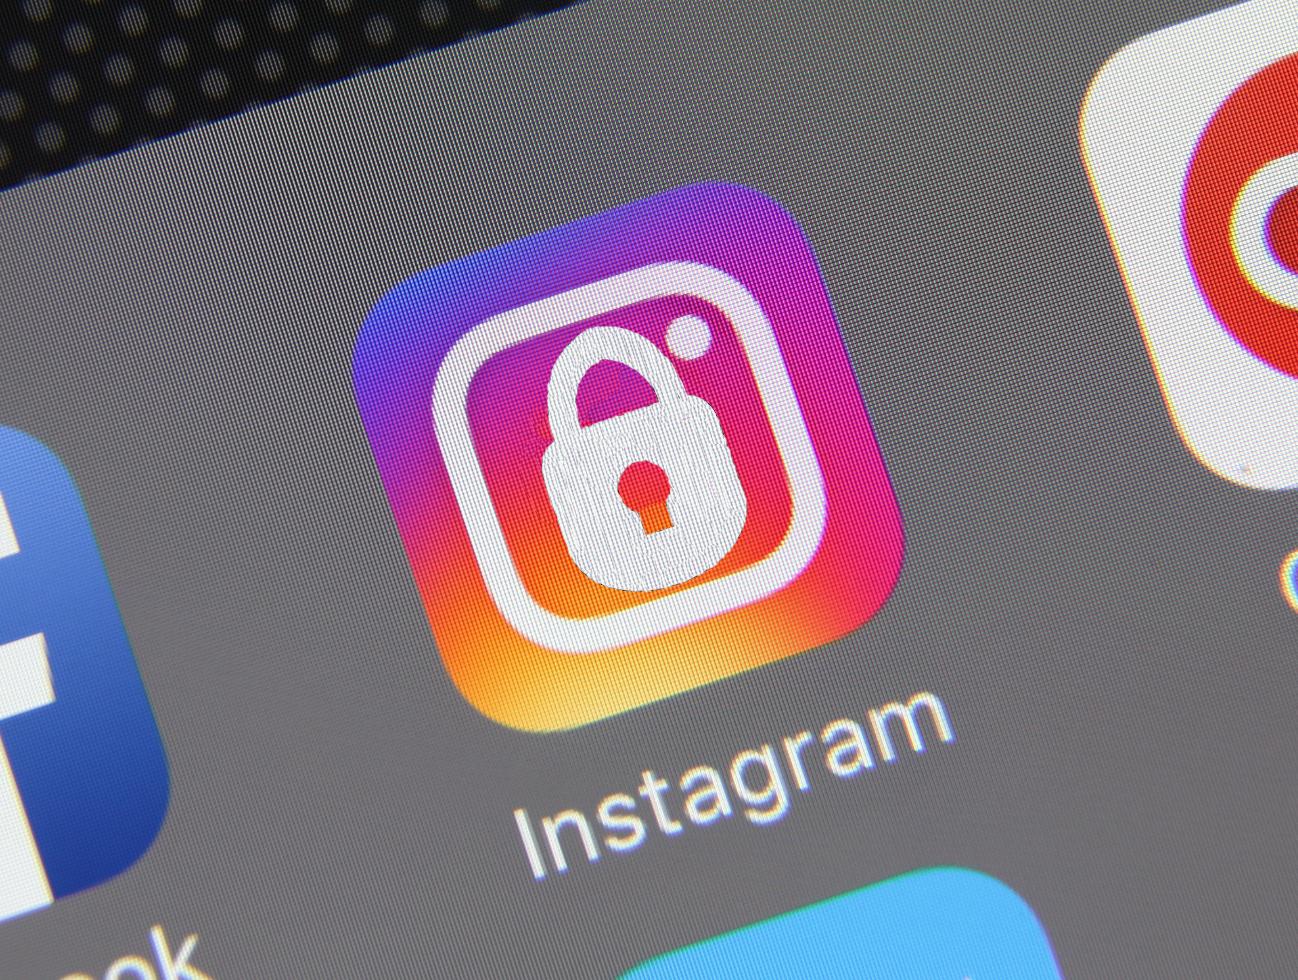 How will a hacker hack into an Instagram account?